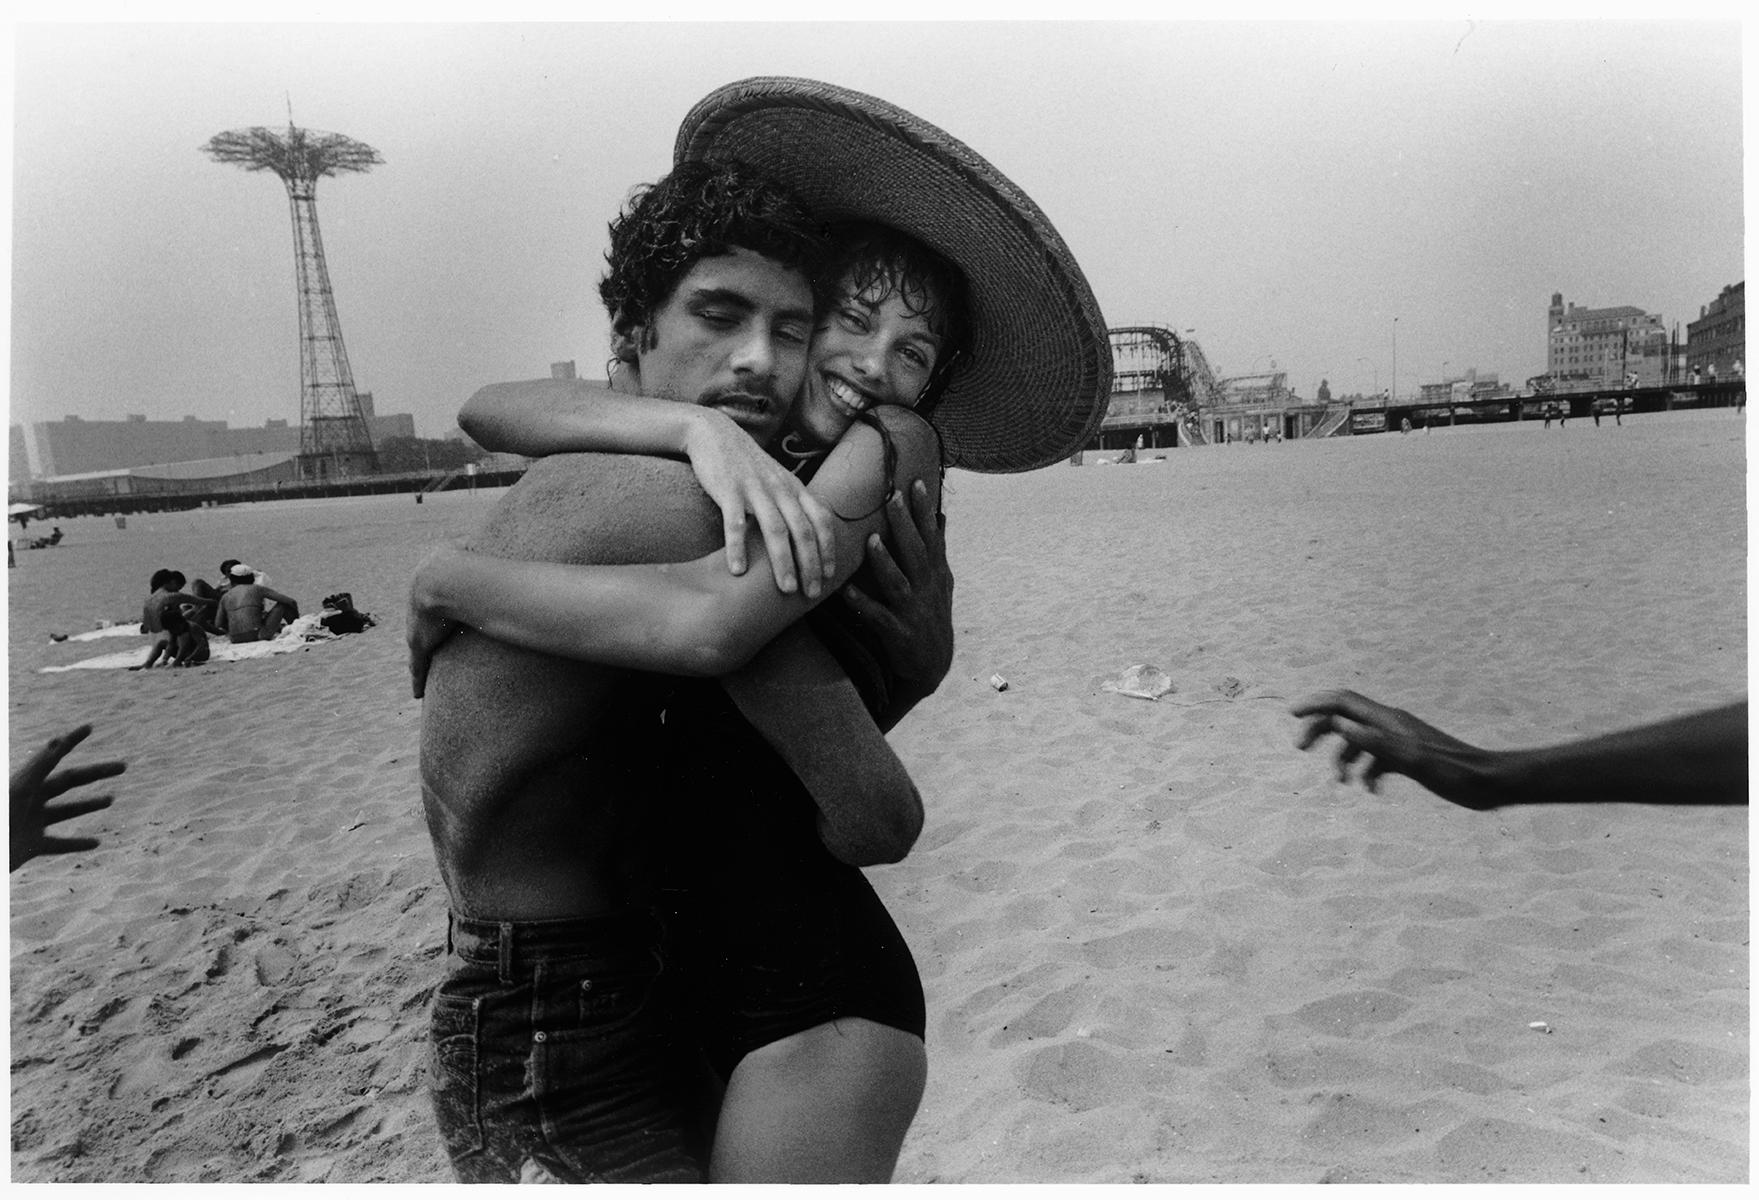 Harvey Stein  Black and White Photograph - The Hug; Closed Eyes and Smile, Love, Cosney Island, beach, New York 